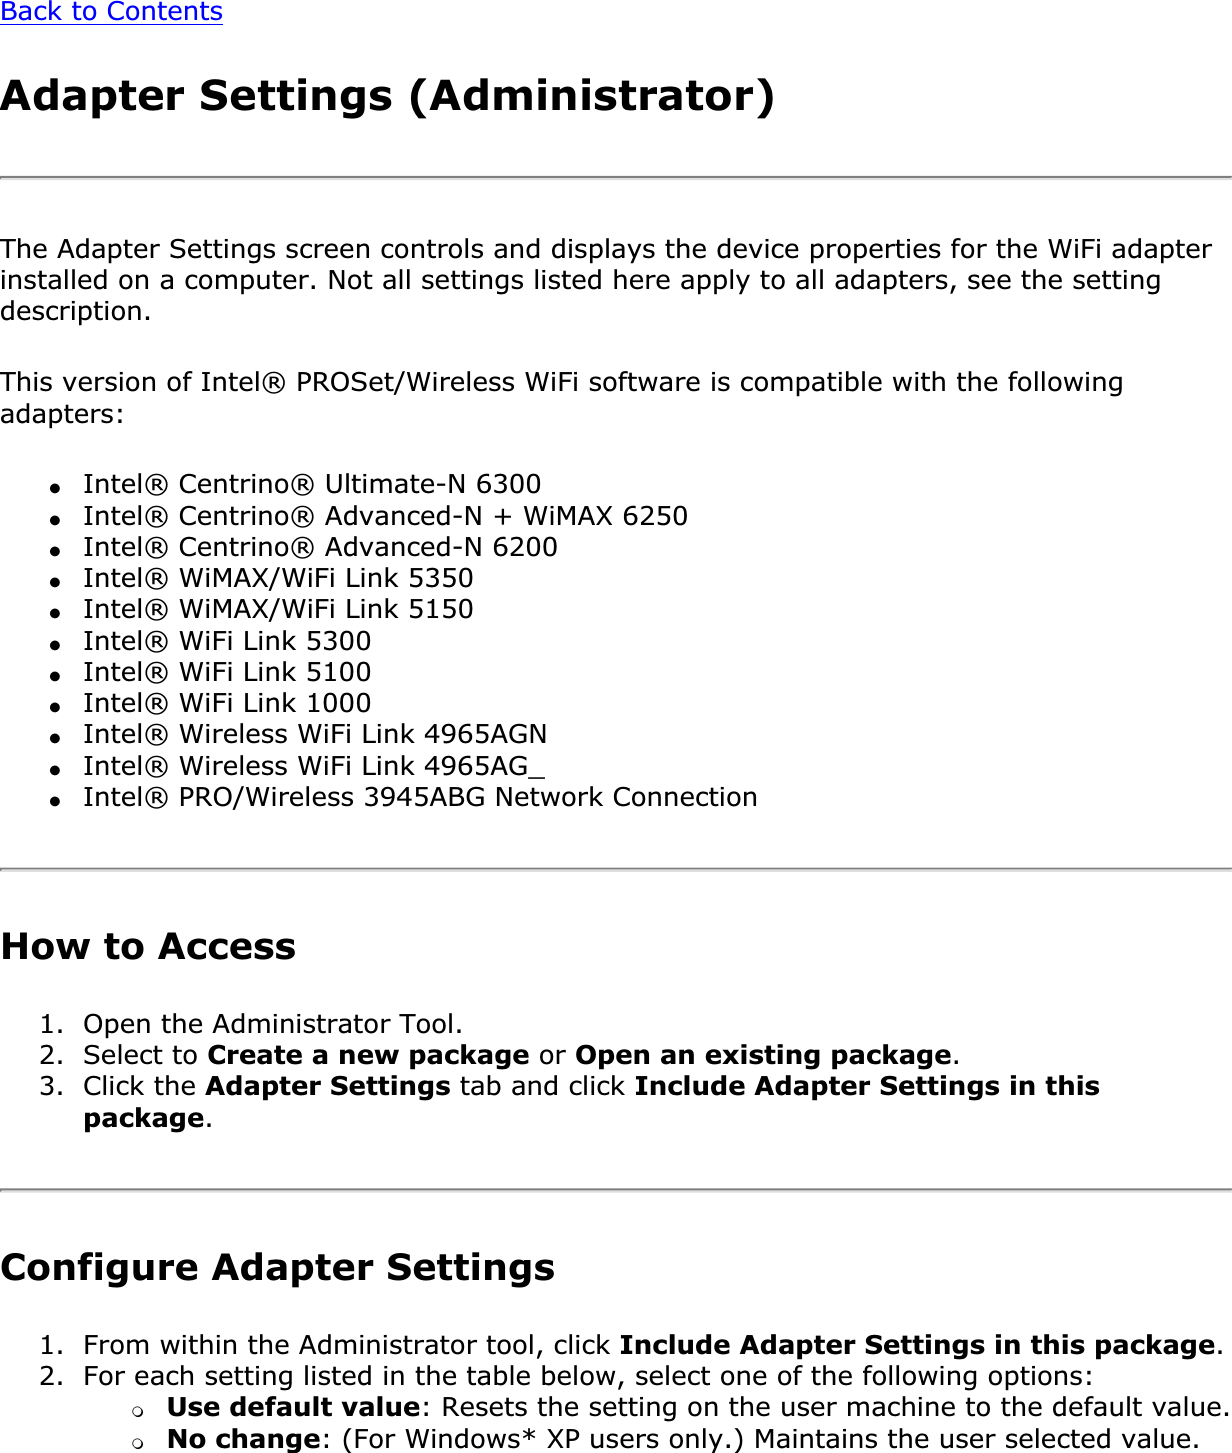 Back to ContentsAdapter Settings (Administrator) The Adapter Settings screen controls and displays the device properties for the WiFi adapter installed on a computer. Not all settings listed here apply to all adapters, see the setting description.This version of Intel® PROSet/Wireless WiFi software is compatible with the following adapters:●Intel® Centrino® Ultimate-N 6300●Intel® Centrino® Advanced-N + WiMAX 6250●Intel® Centrino® Advanced-N 6200●Intel® WiMAX/WiFi Link 5350●Intel® WiMAX/WiFi Link 5150●Intel® WiFi Link 5300●Intel® WiFi Link 5100●Intel® WiFi Link 1000 ●Intel® Wireless WiFi Link 4965AGN●Intel® Wireless WiFi Link 4965AG_●Intel® PRO/Wireless 3945ABG Network ConnectionHow to Access 1. Open the Administrator Tool. 2. Select to Create a new package or Open an existing package.3. Click the Adapter Settings tab and click Include Adapter Settings in this package.Configure Adapter Settings1. From within the Administrator tool, click Include Adapter Settings in this package.2. For each setting listed in the table below, select one of the following options: ❍Use default value: Resets the setting on the user machine to the default value.❍No change: (For Windows* XP users only.) Maintains the user selected value. 